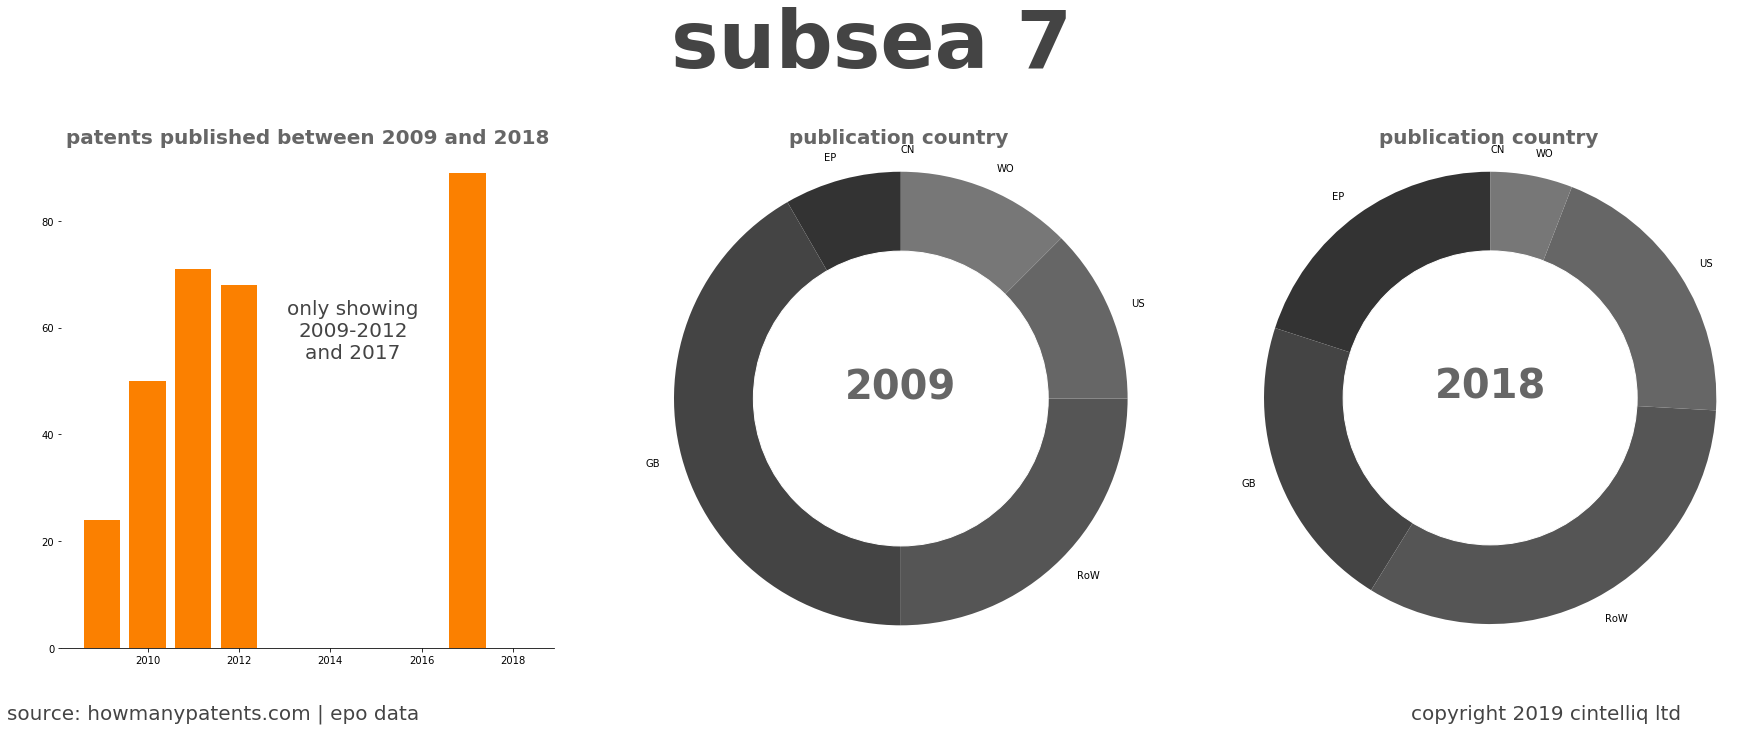 summary of patents for Subsea 7